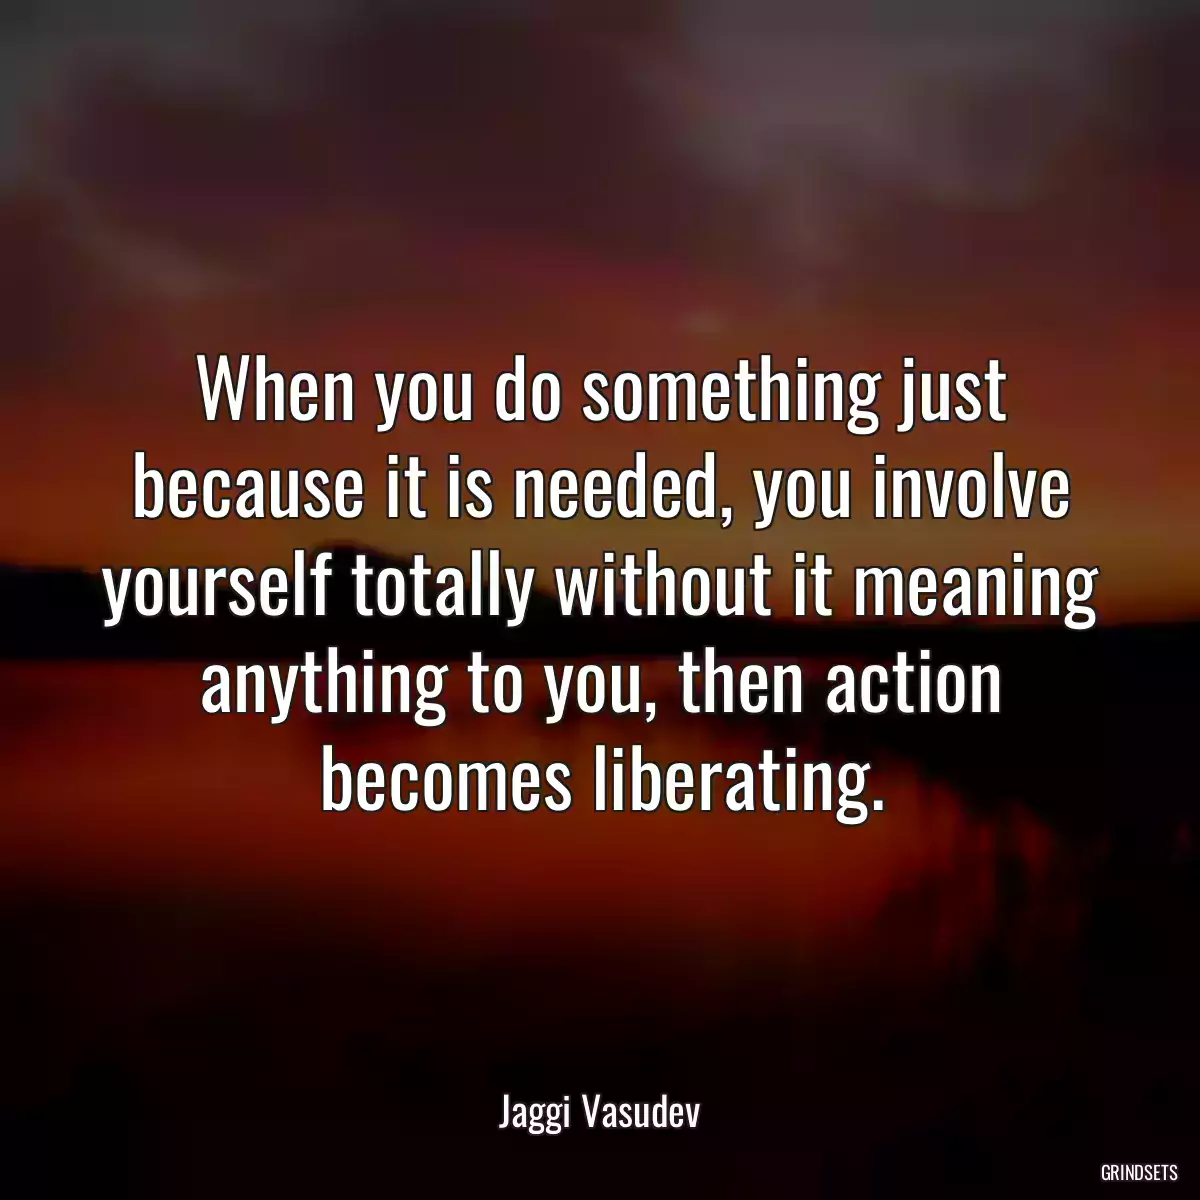 When you do something just because it is needed, you involve yourself totally without it meaning anything to you, then action becomes liberating.